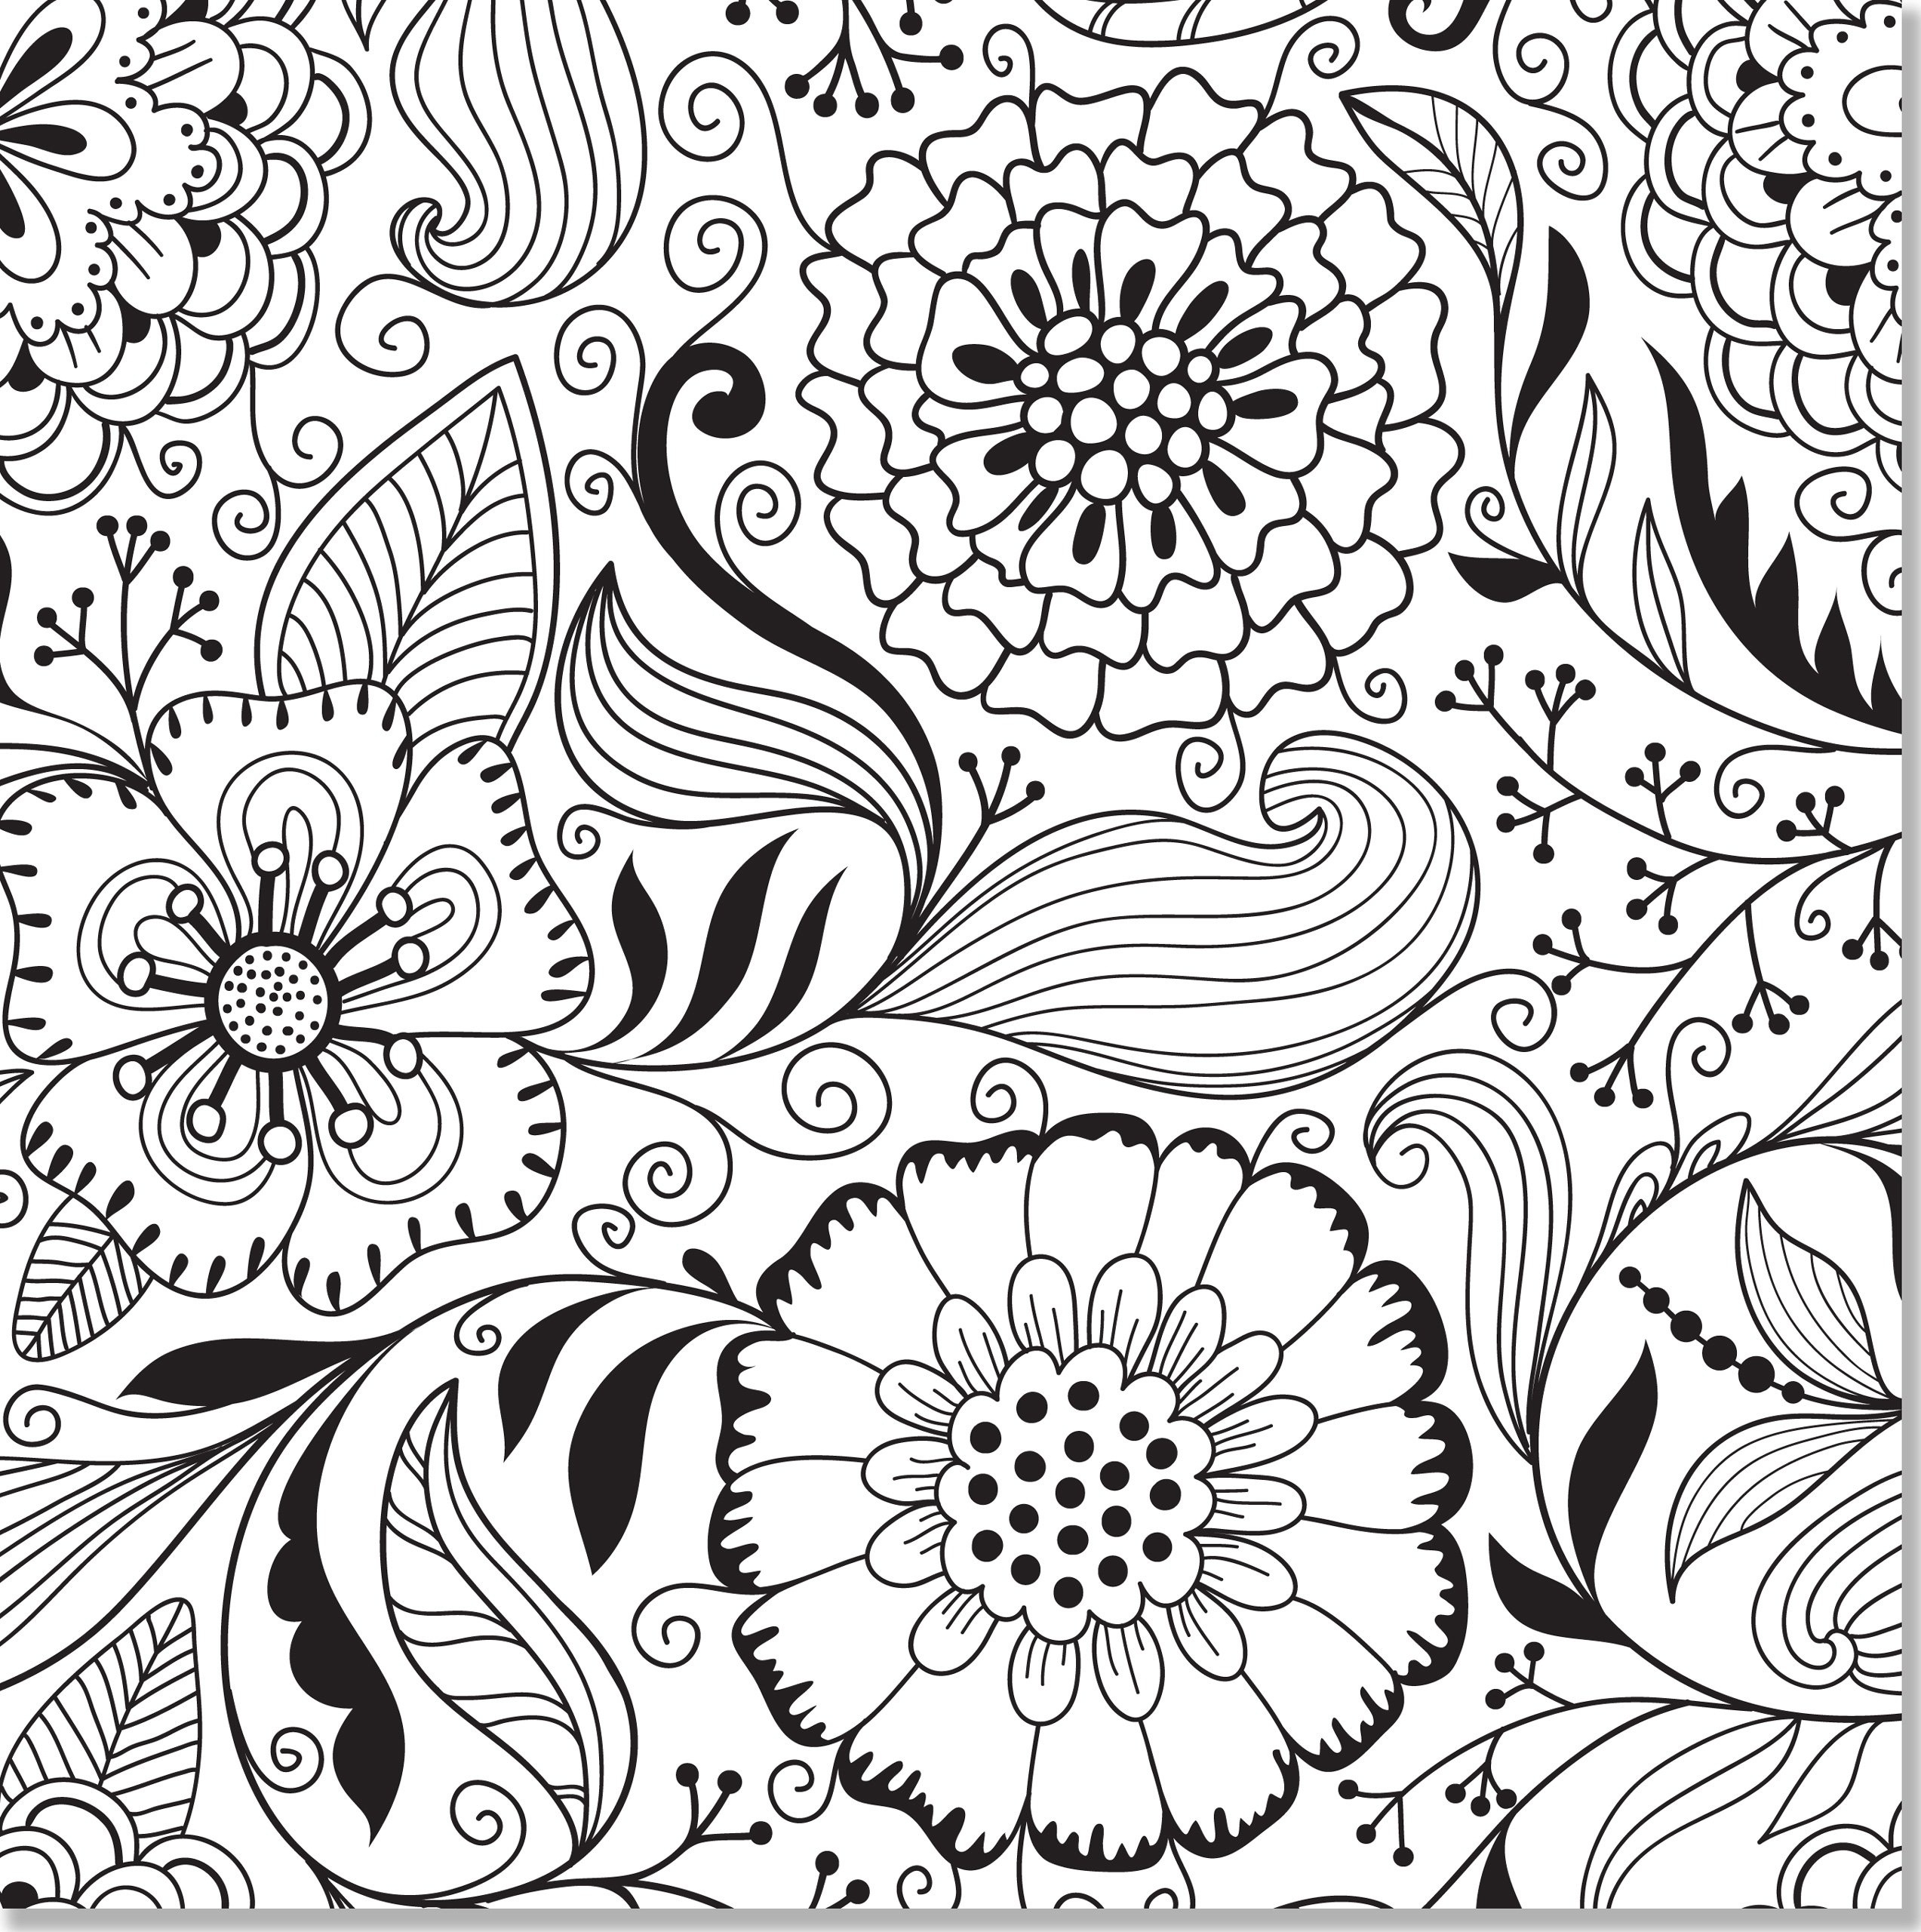 coloring-pages-ideas-coloring-designs-for-adults-circle-free-free-printable-coloring-designs